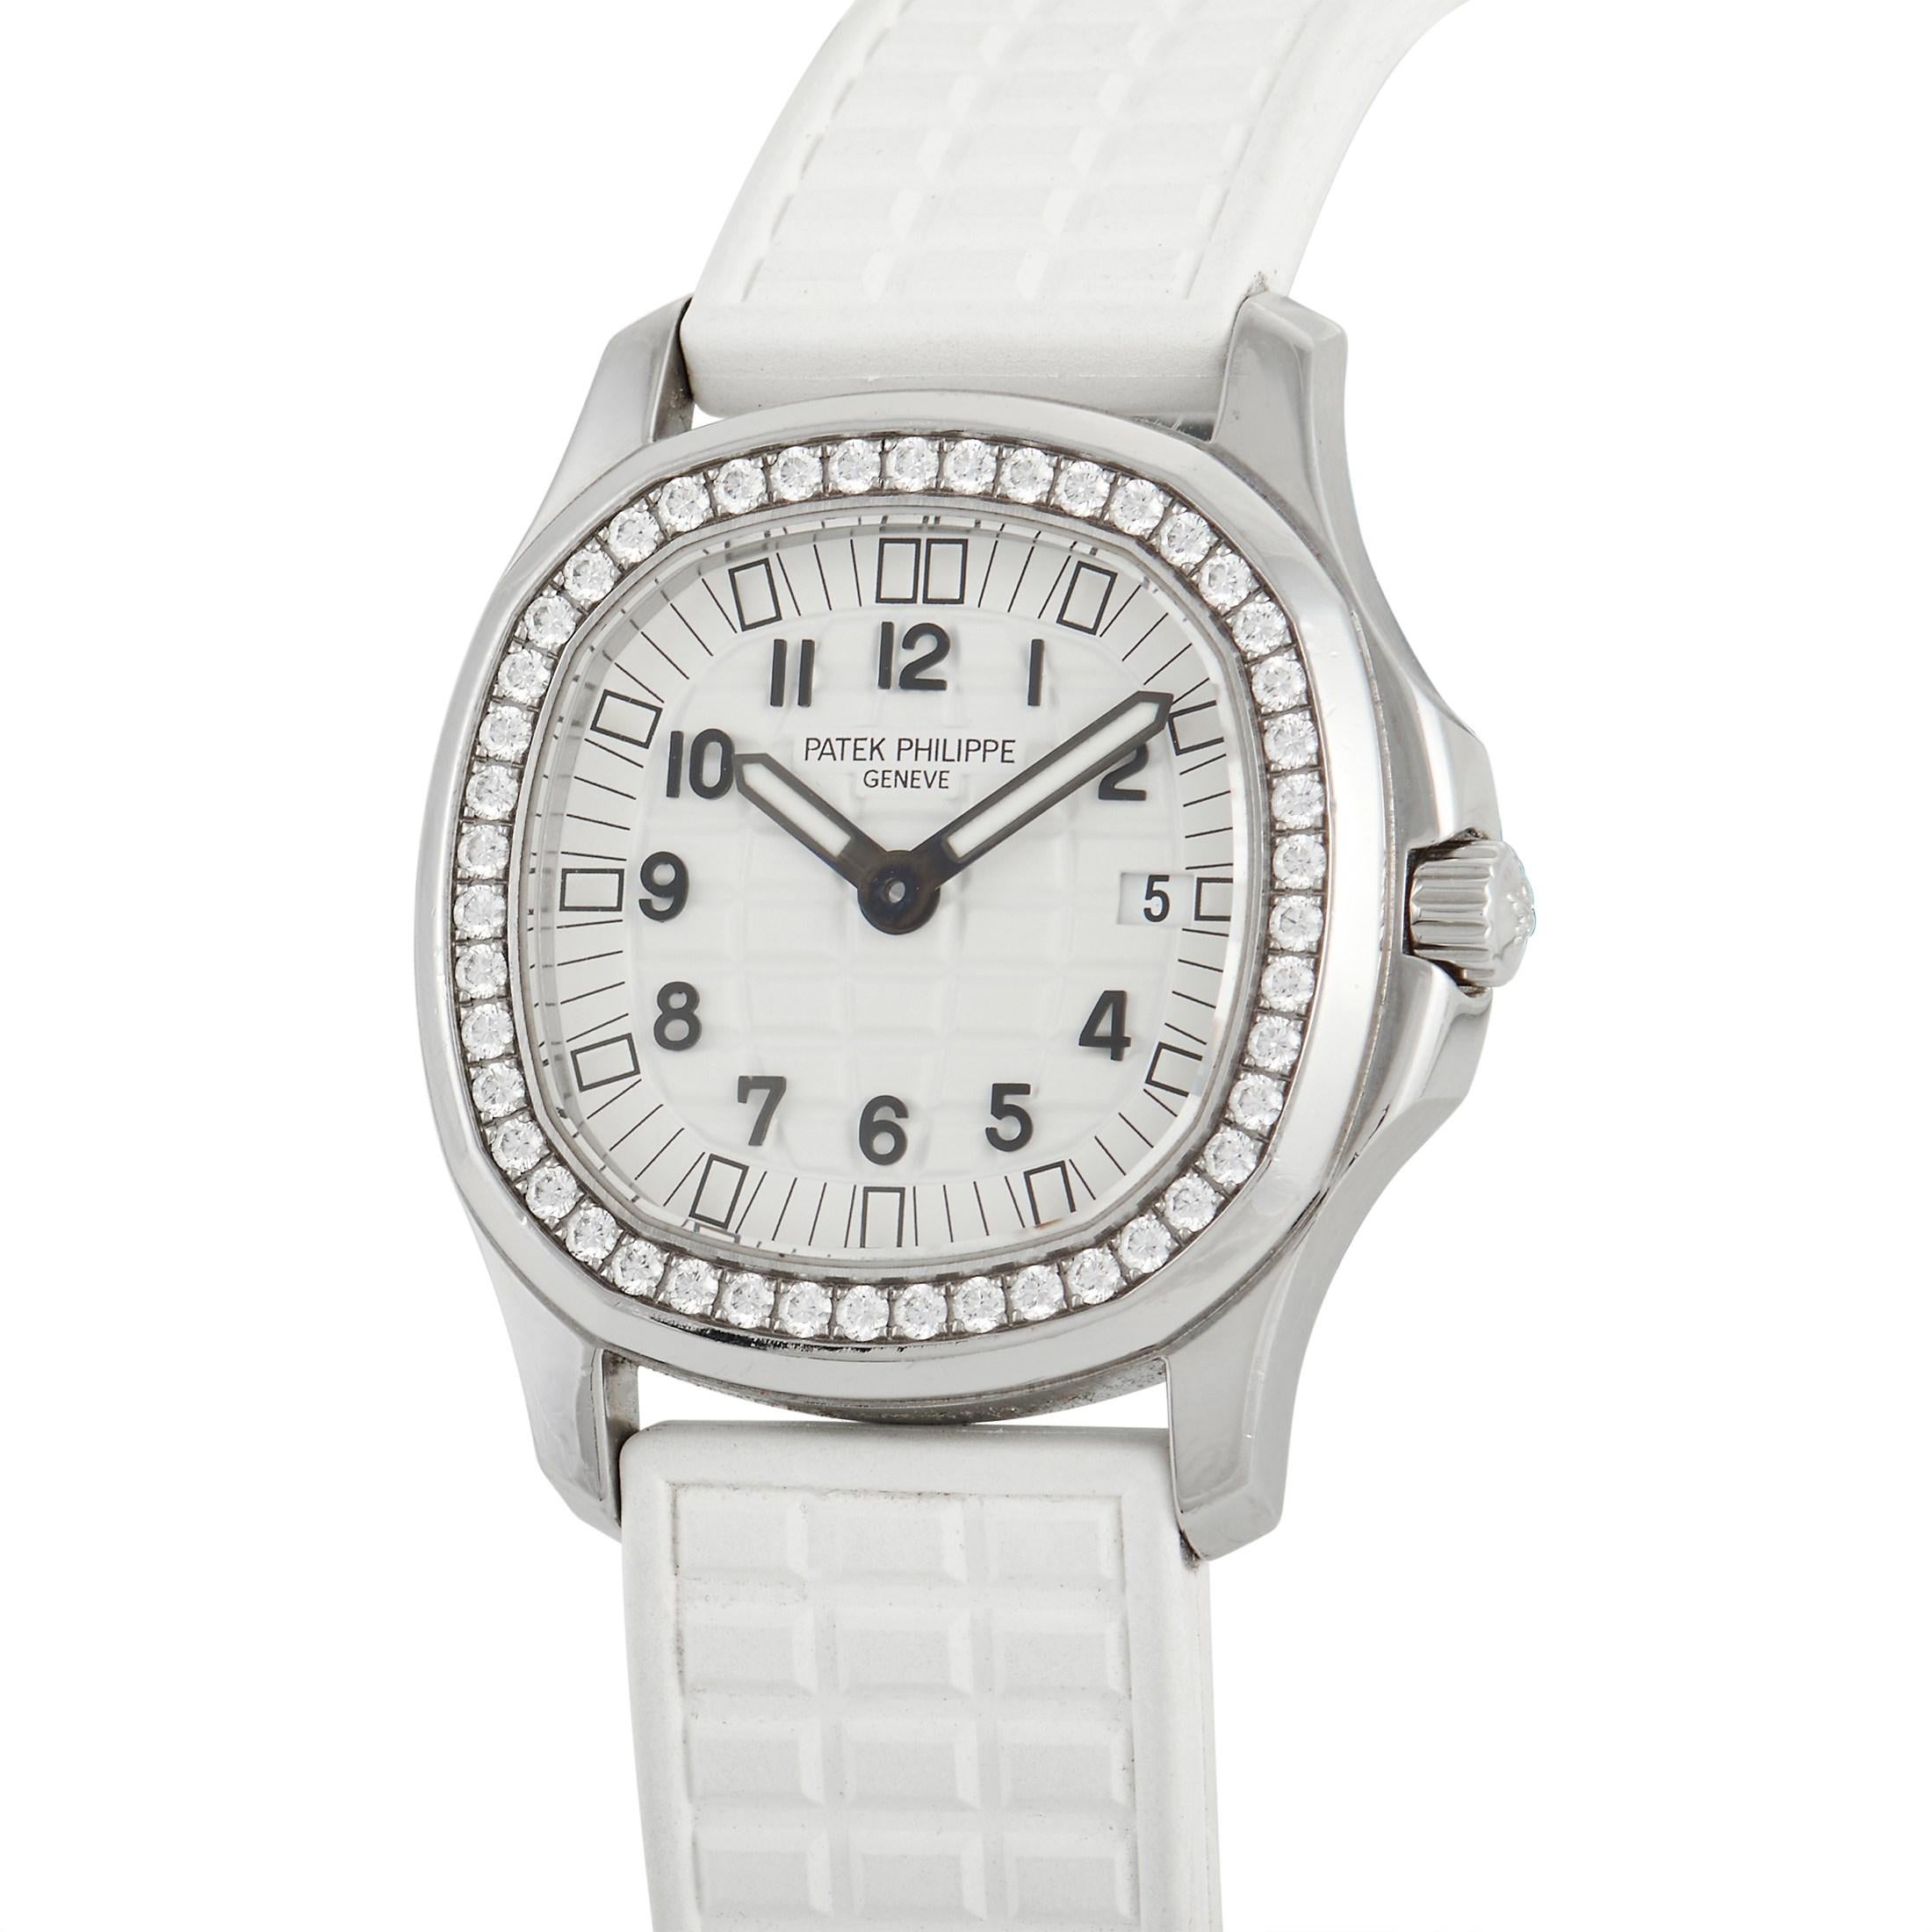 The Patek Philippe Aquanaut Ladies Watch, reference number 4961A-001, is an impeccably crafted luxury timepiece. 

This watch’s opulent 36mm stainless steel case contrasts beautifully against the textured rubber strap. Accented by a glittering